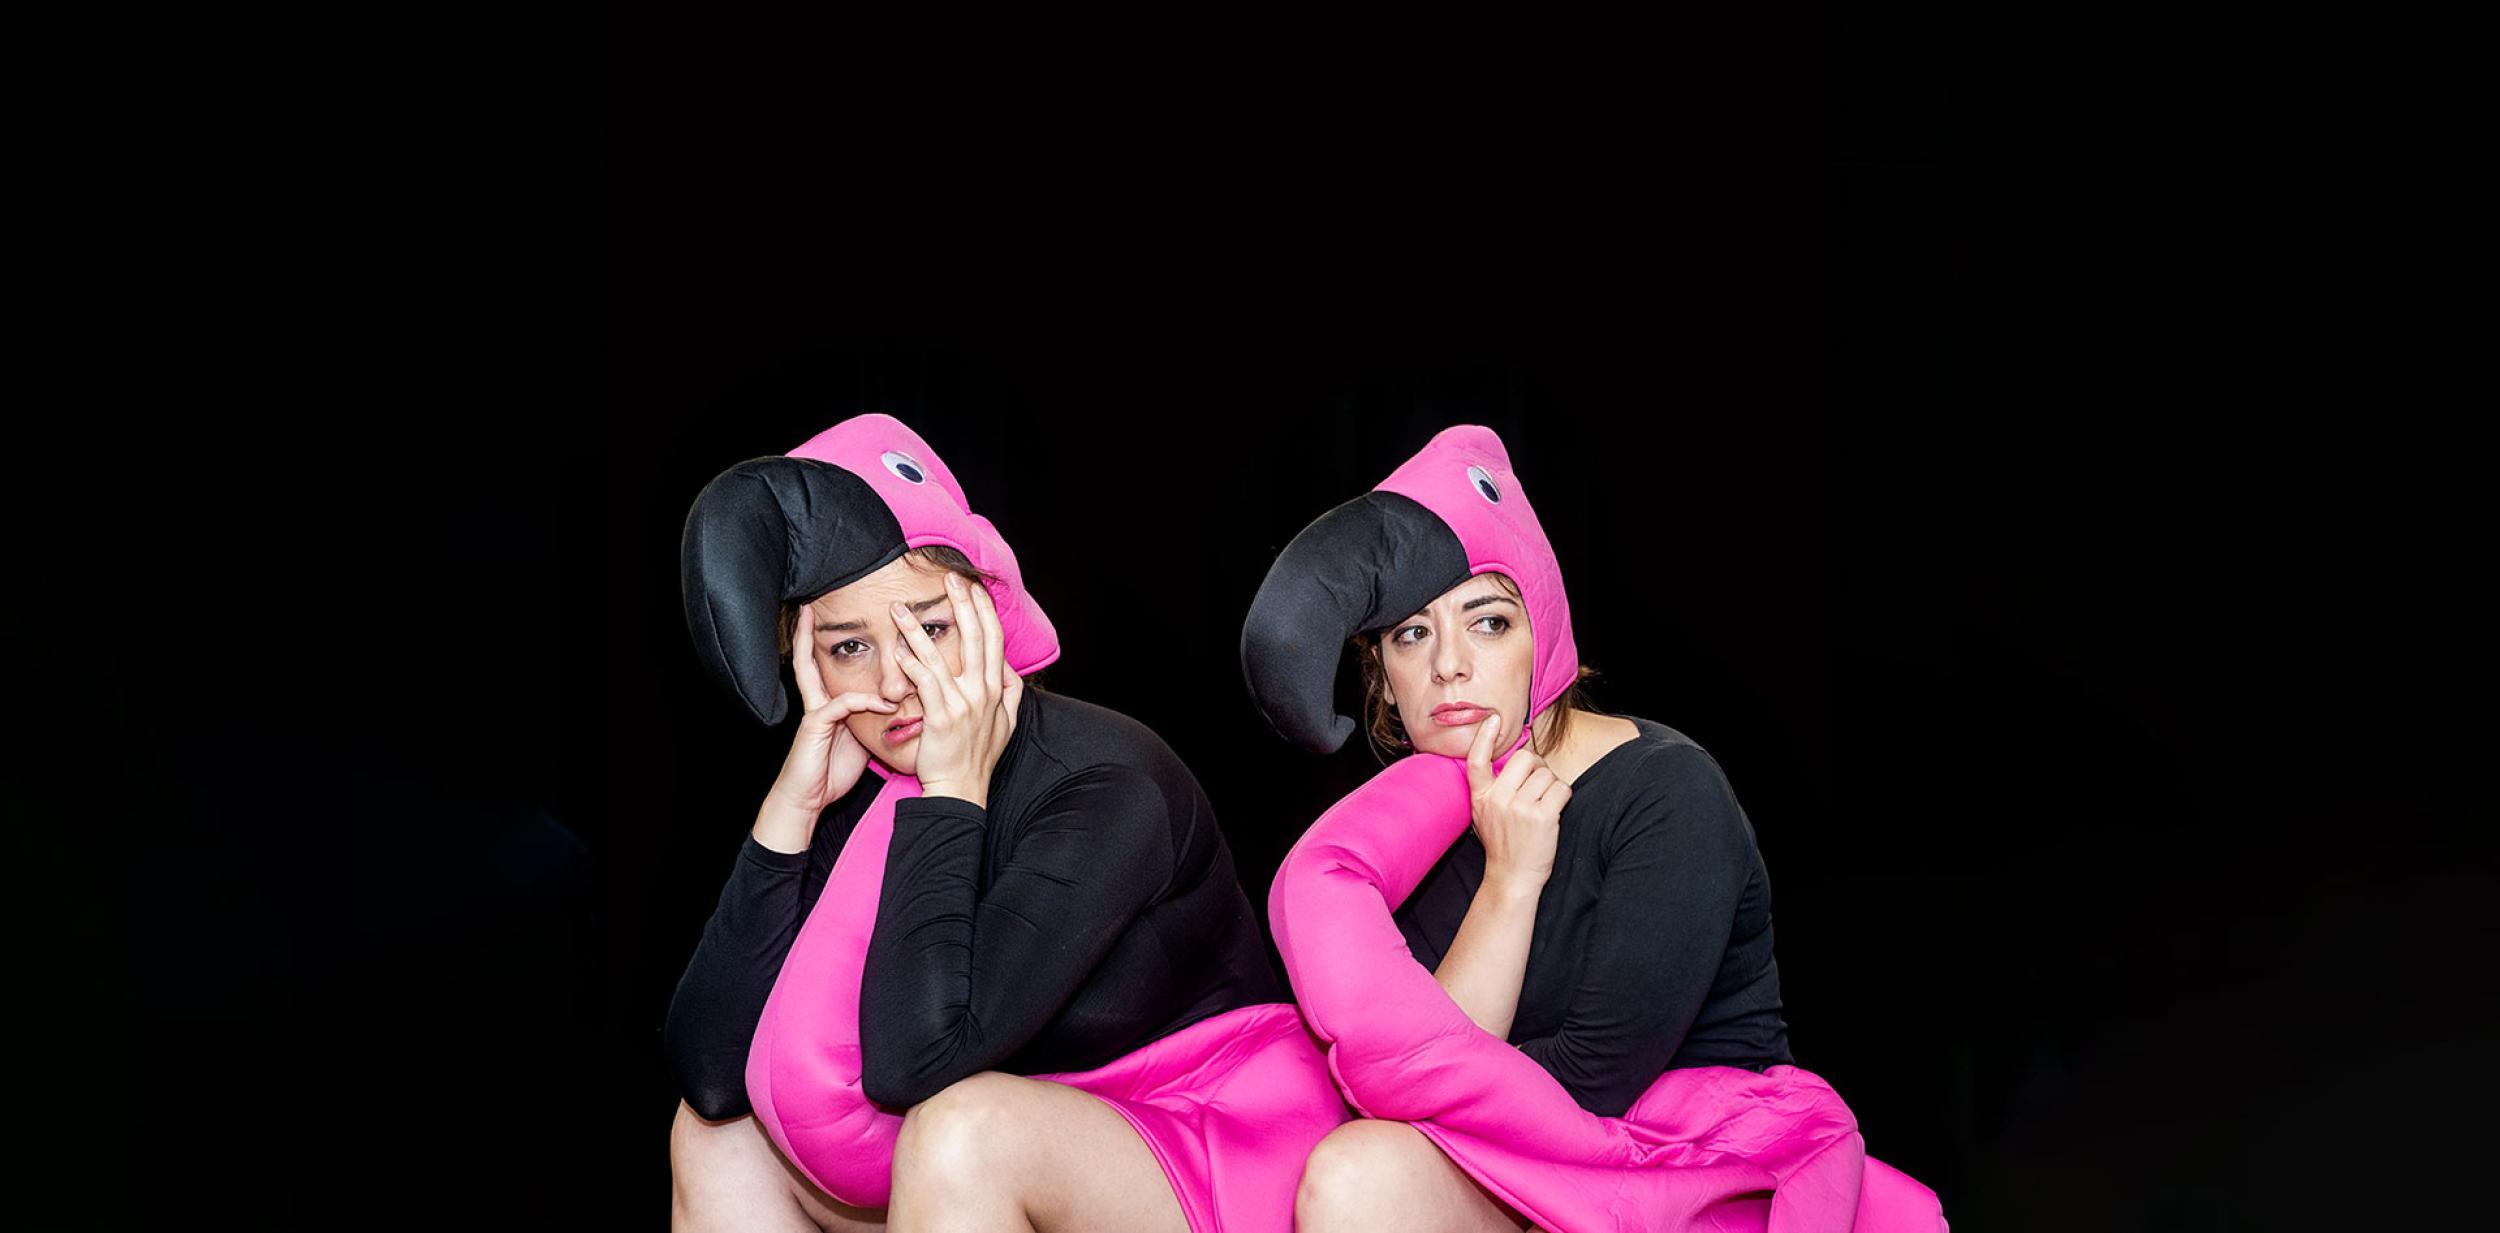 Two people dressed as pink flamingos